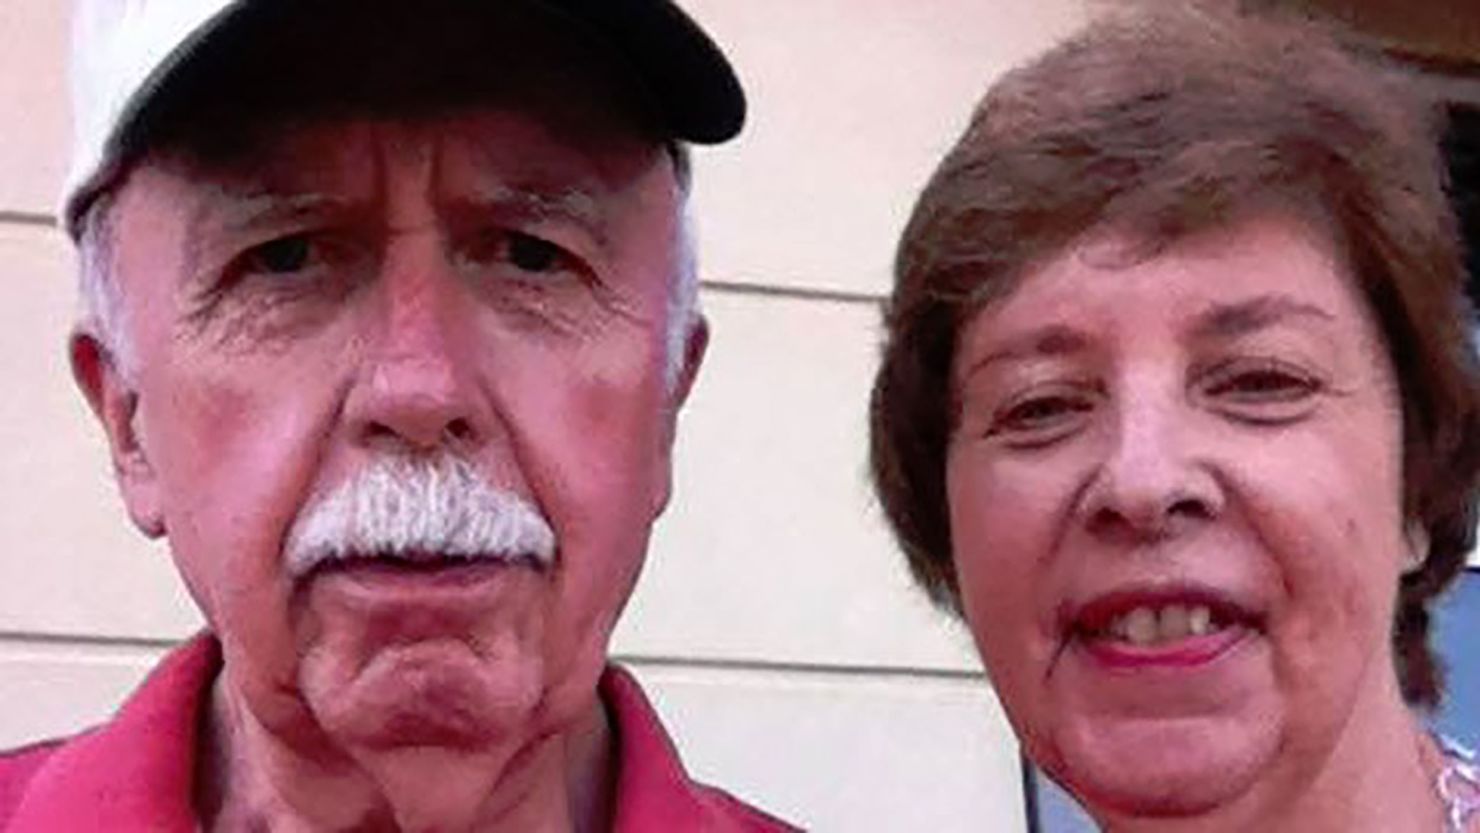 Bud, 69, and June Runion, 66, vanished after going to meet a man who contacted them on Craigslist about selling a classic car.